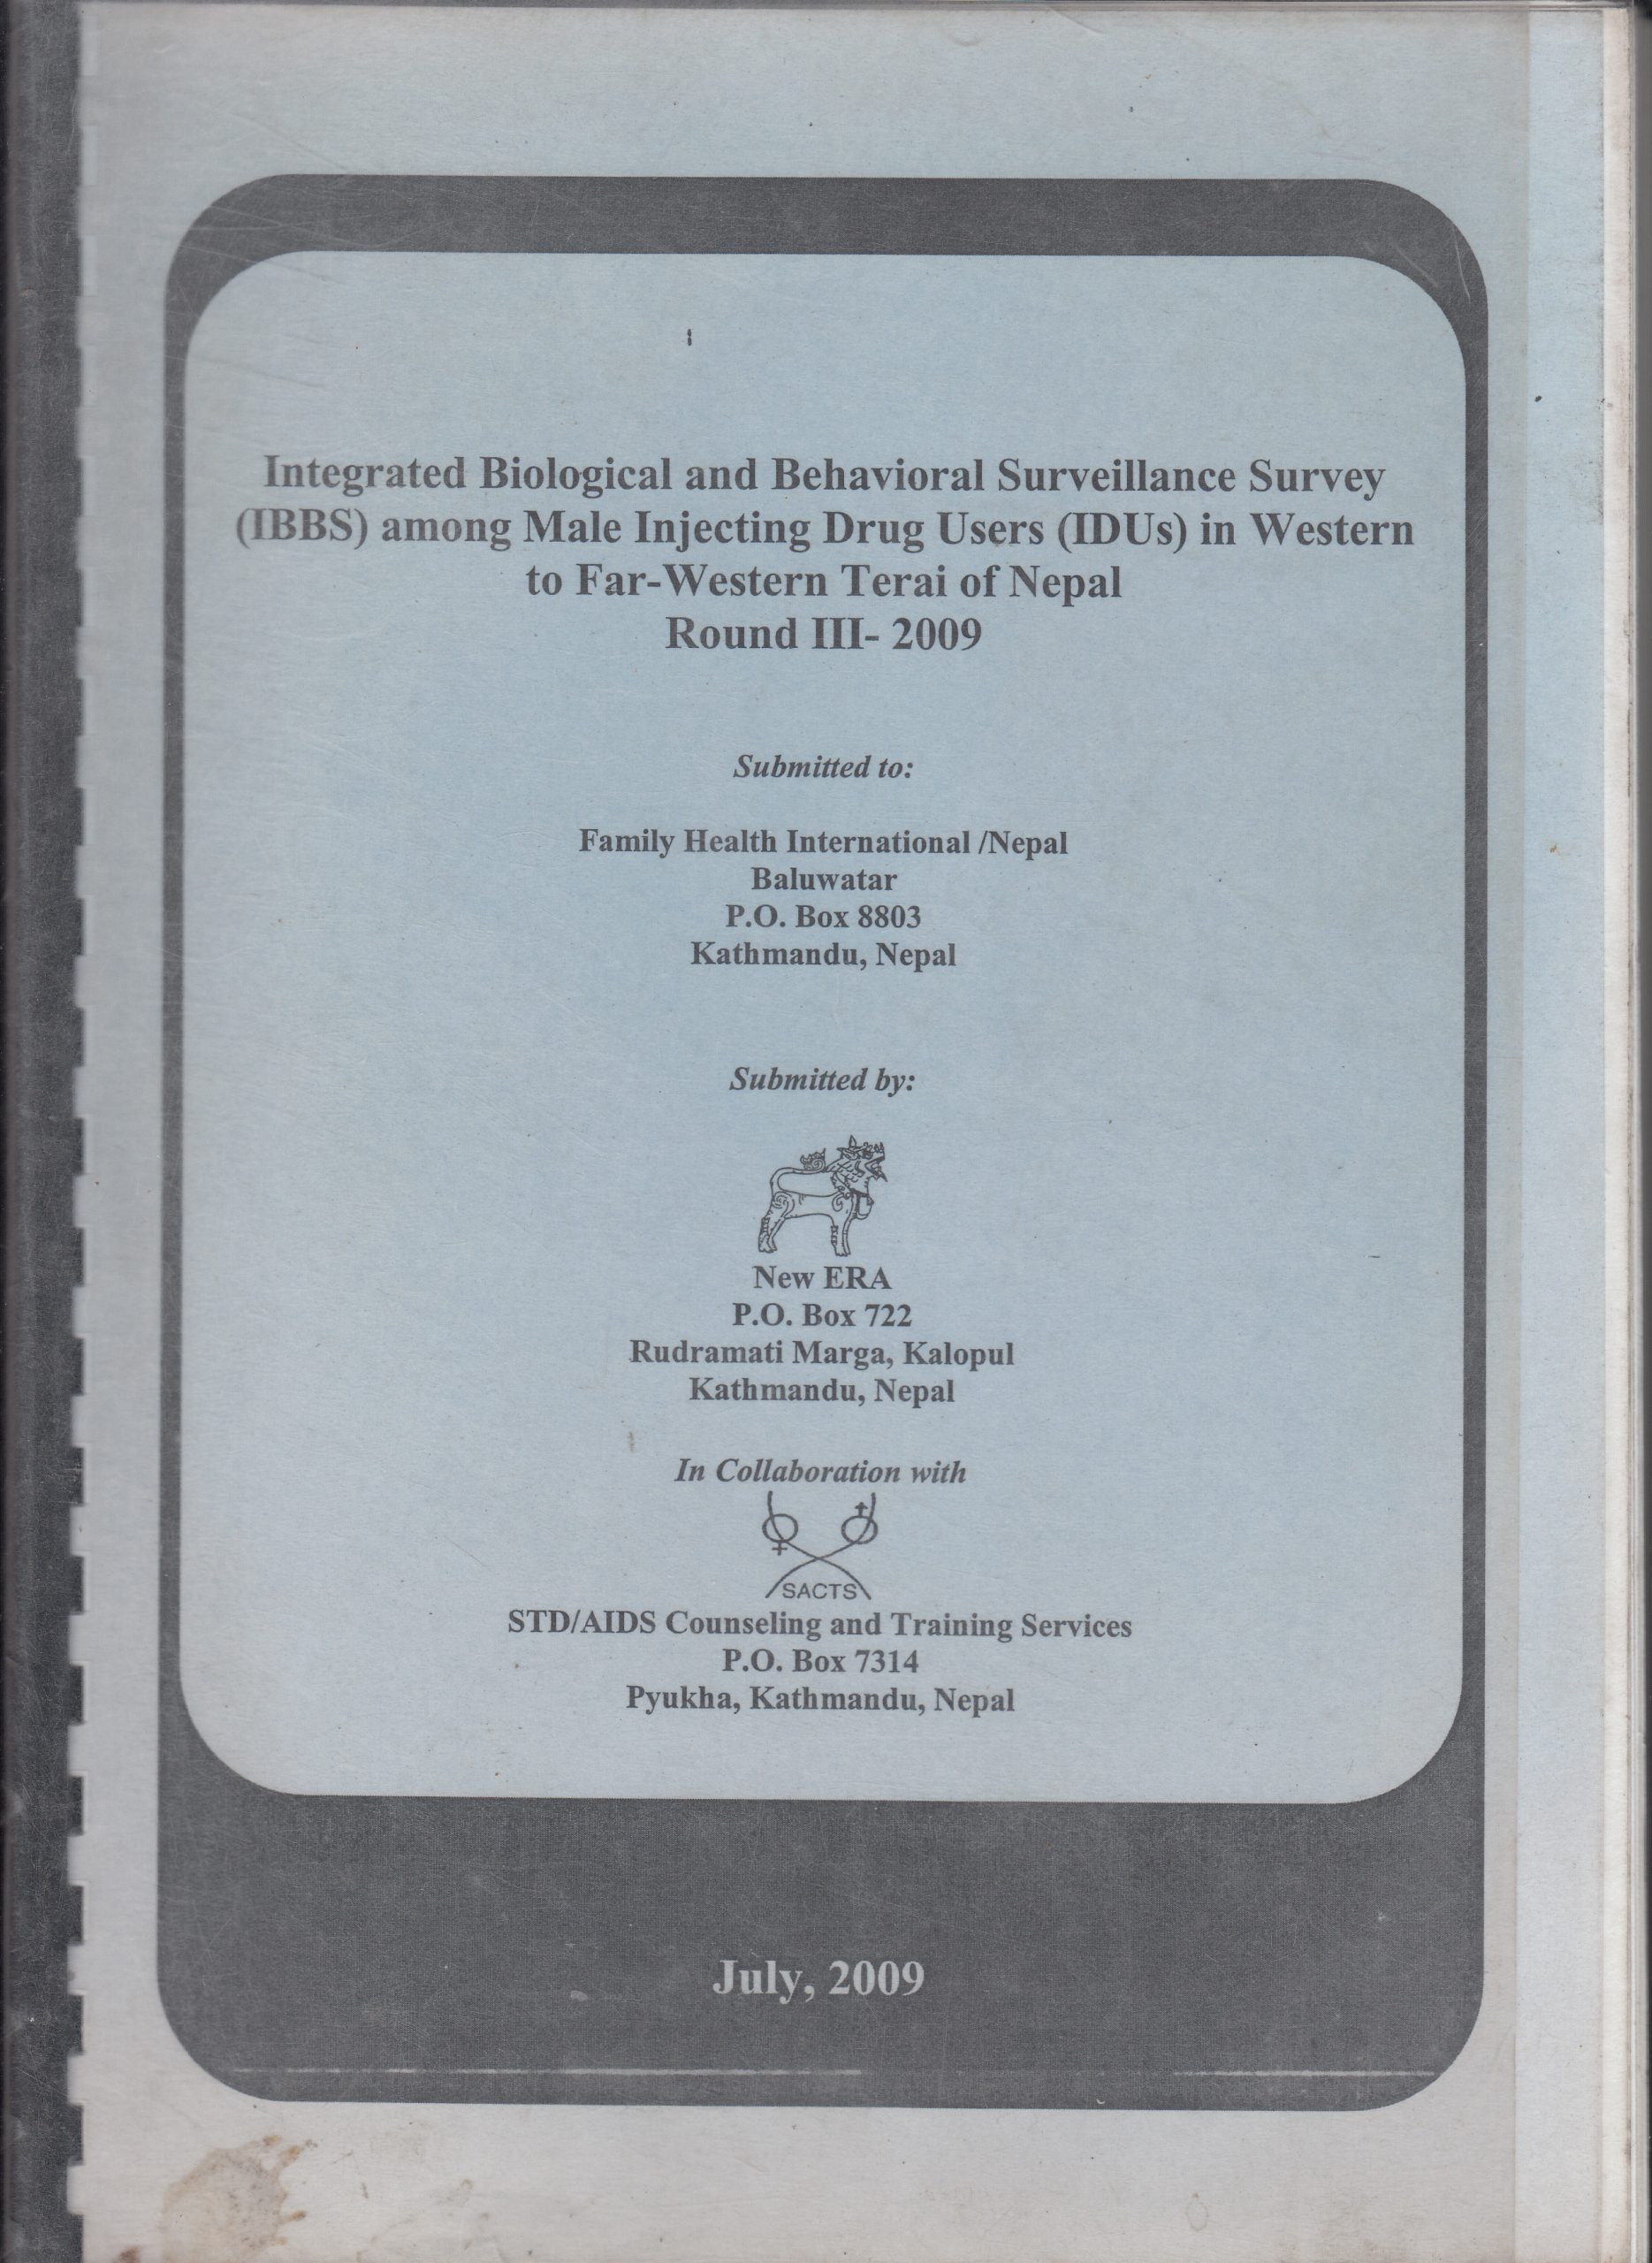 Integrated Biological and Behavioral Surveillance Survey (IBBS) among Male Injecting Drug Users (IDUs) in Western to Far-Western Terai of Nepal, Round III – 2009